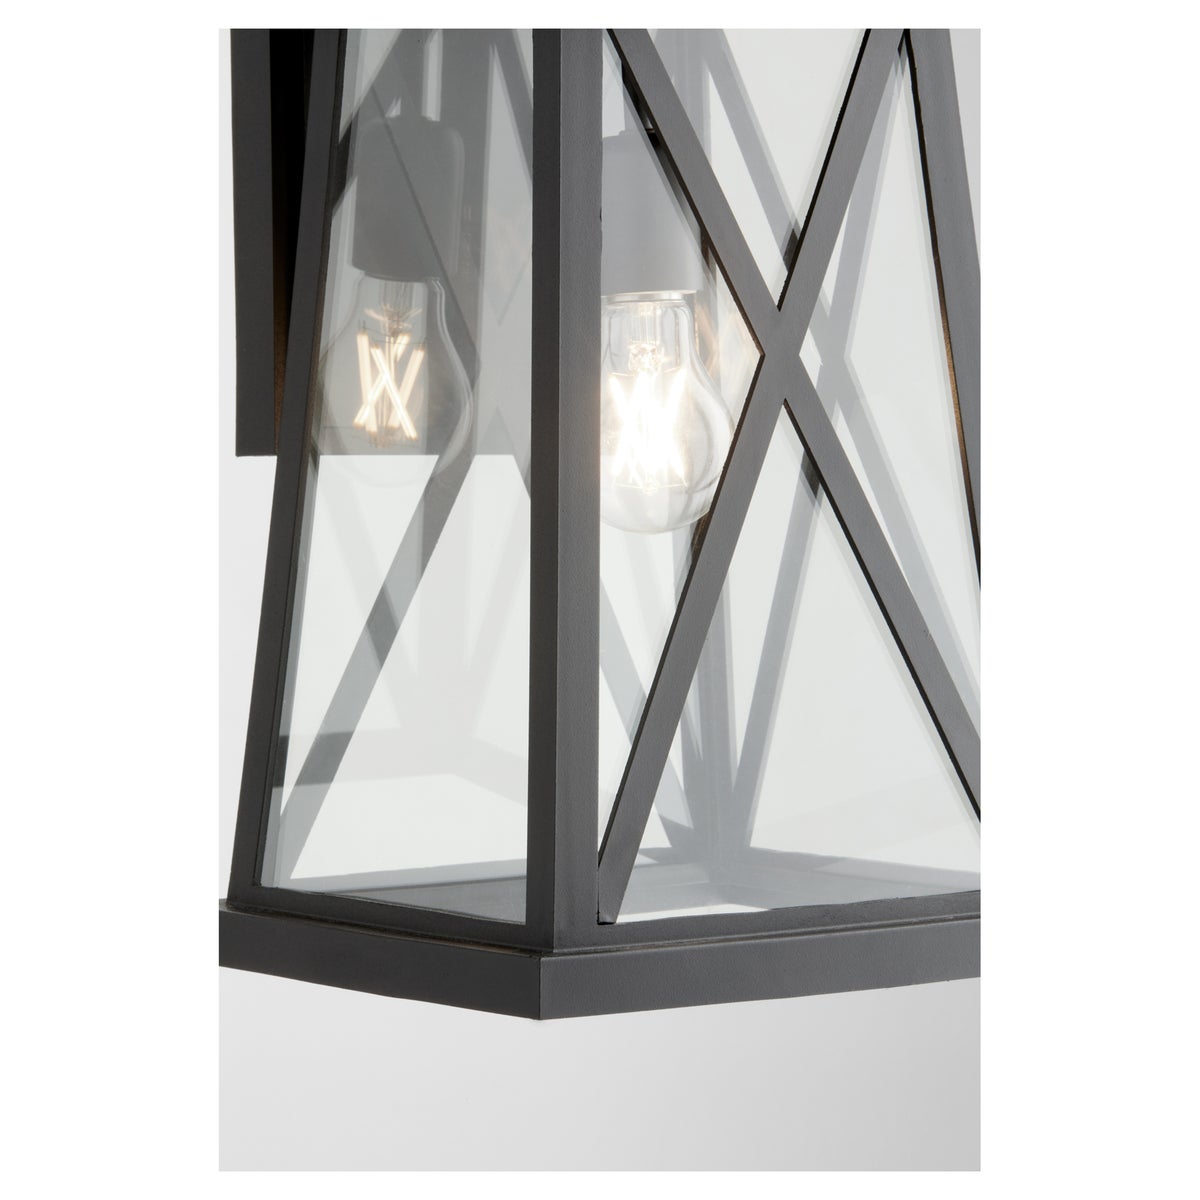 Black Outdoor Wall Light with X-Brace Design, casting warm glow, enhancing outdoor elegance. UL Listed for wet locations. 100W, Medium E26 base.